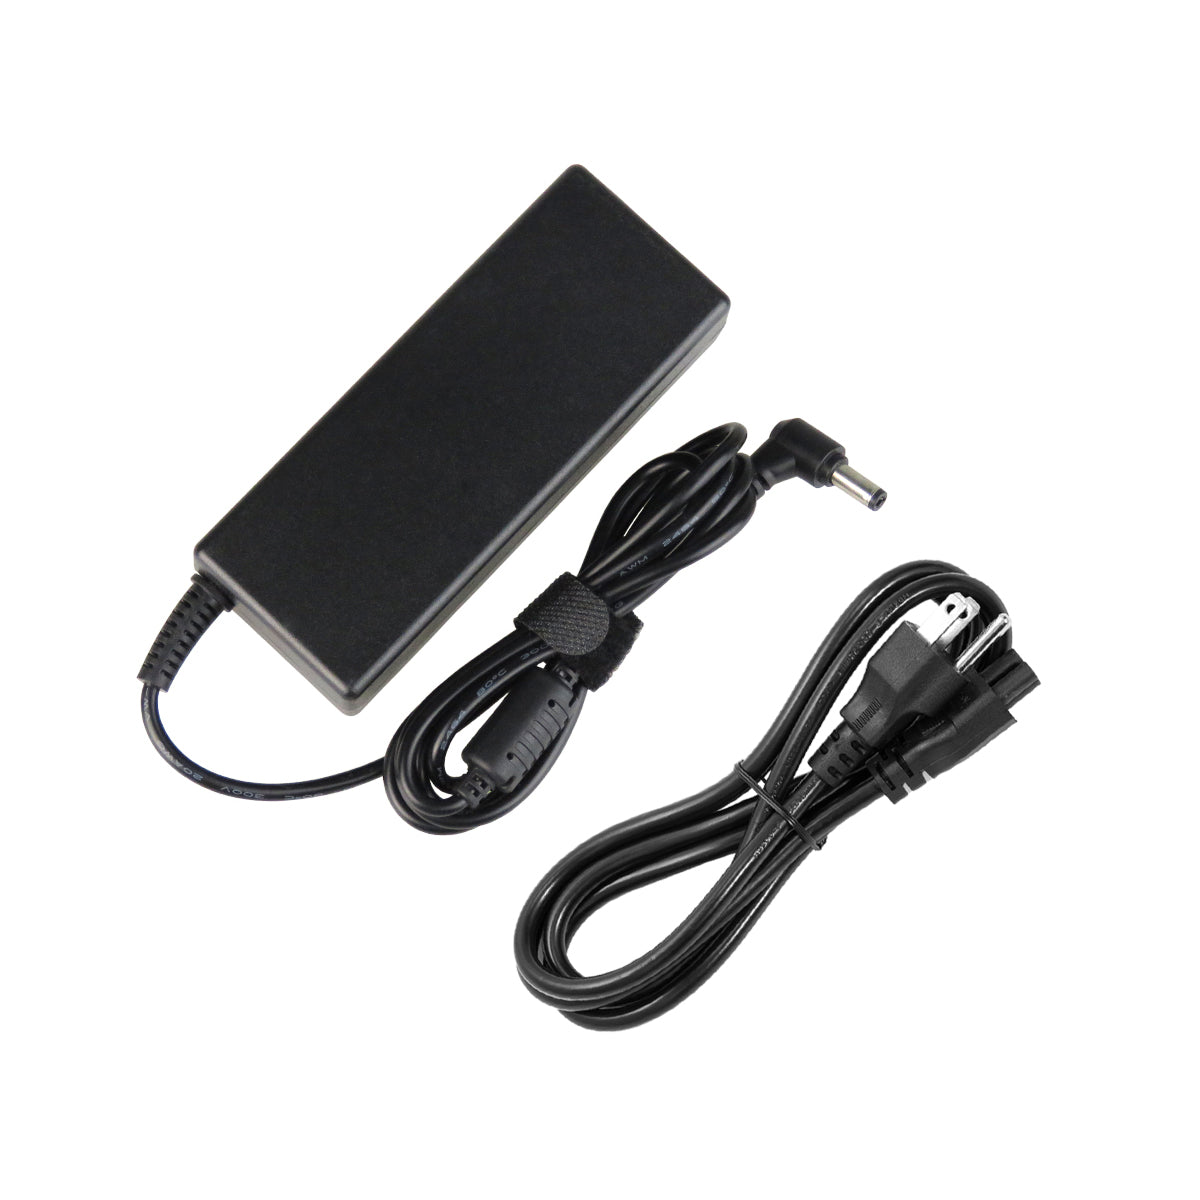 AC Adapter Charger for ASUS P45V Notebook.